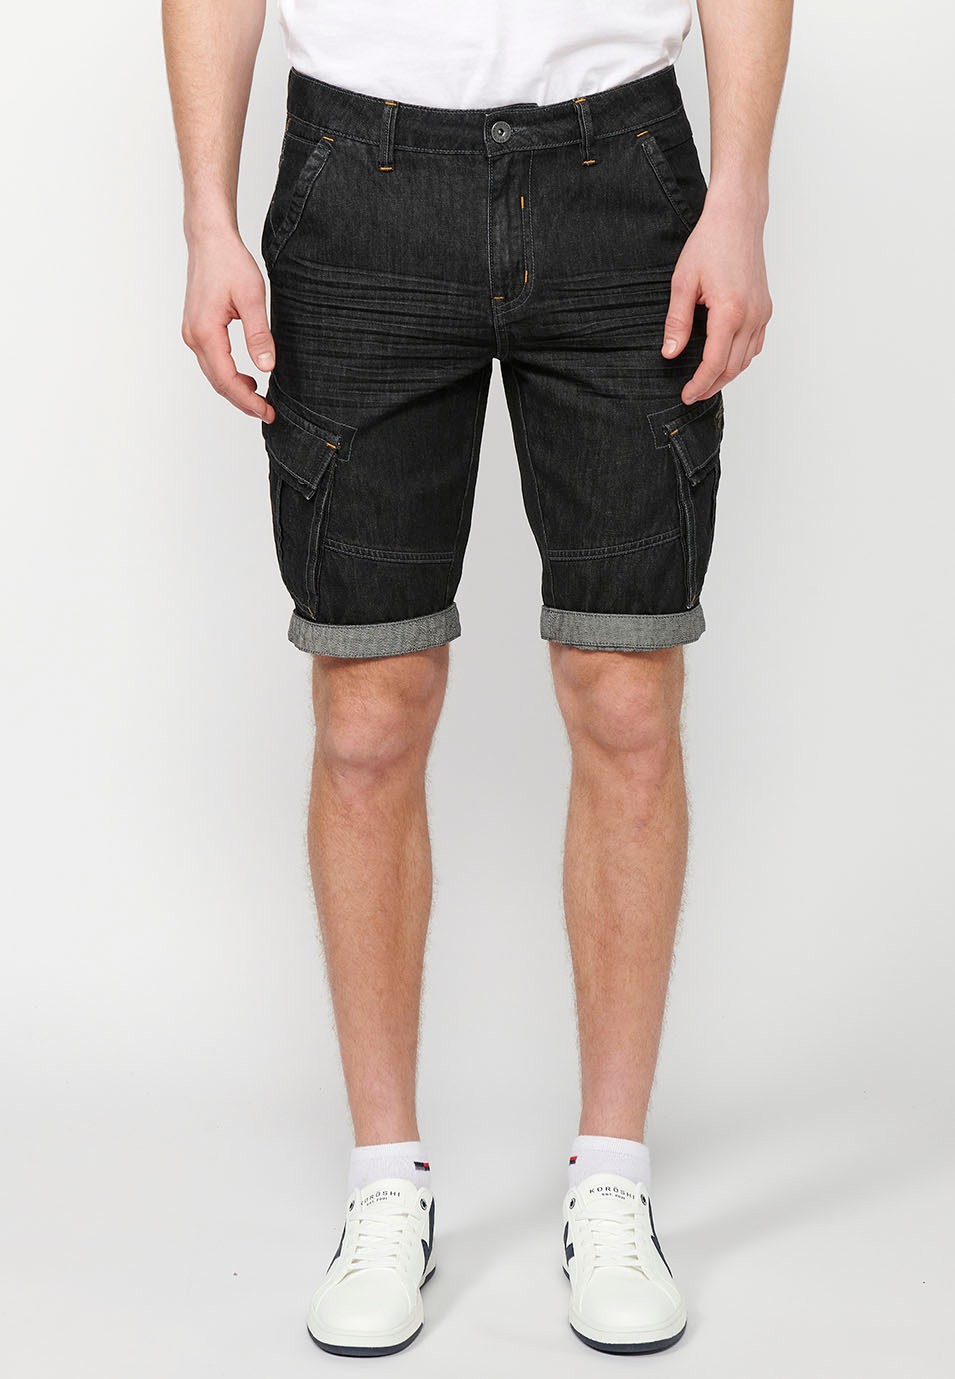 Denim Bermuda Shorts with Turn-Up Finish and Front Zipper and Button Closure with Pockets, One Ticket Pocket and Two Side Pockets in Black for Men 1